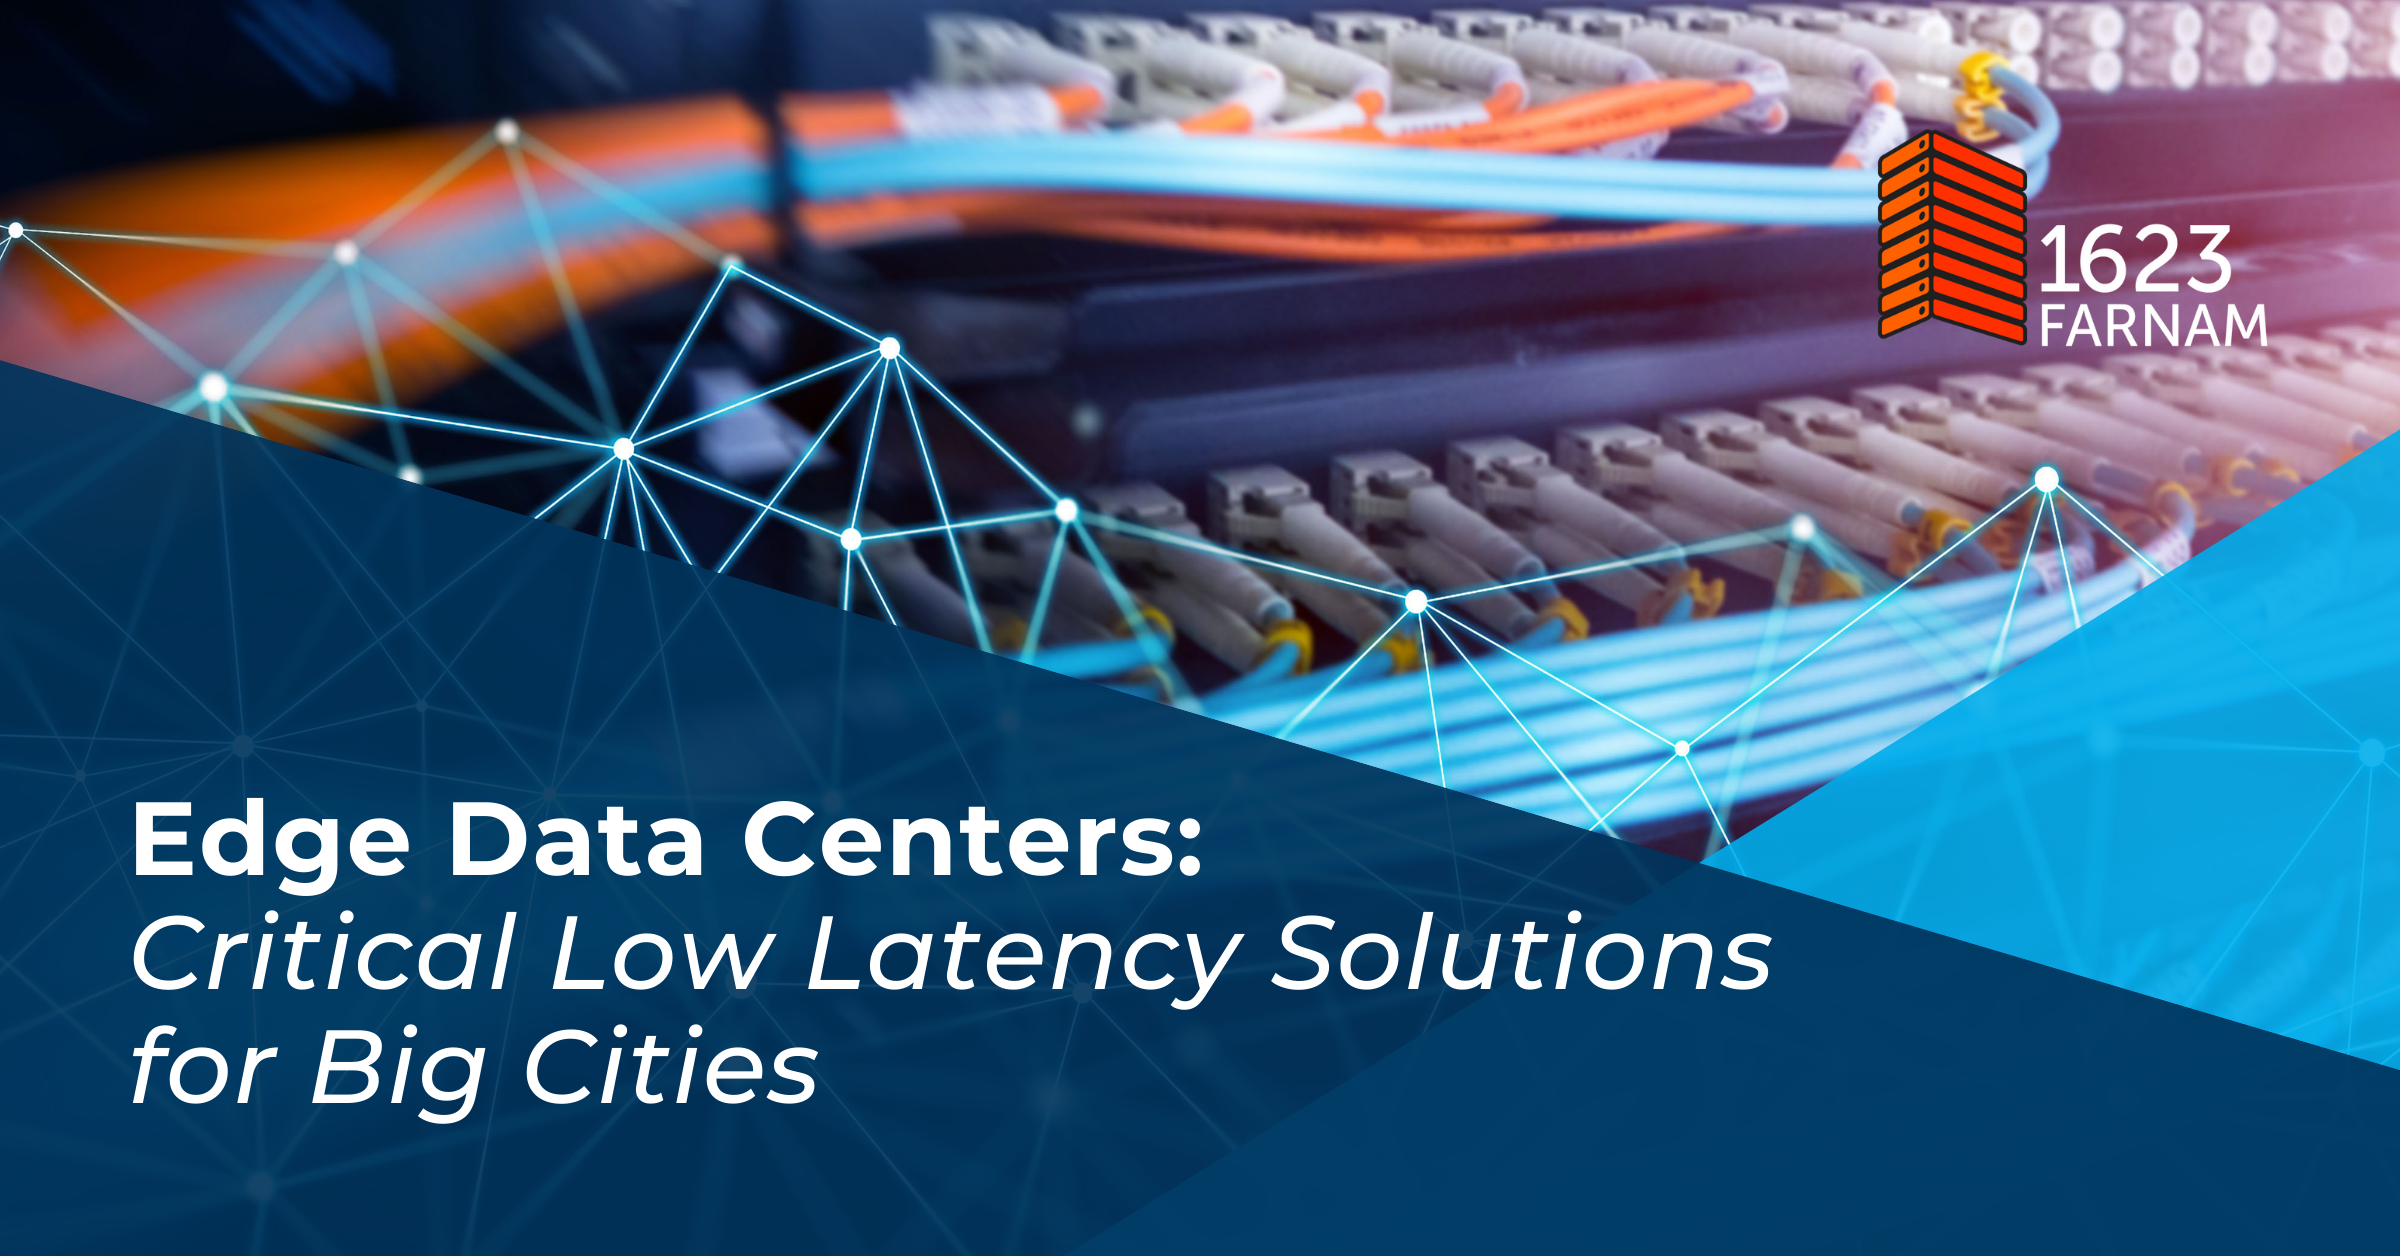 Edge Data Centers: Critical Low Latency Solutions for Big Cities